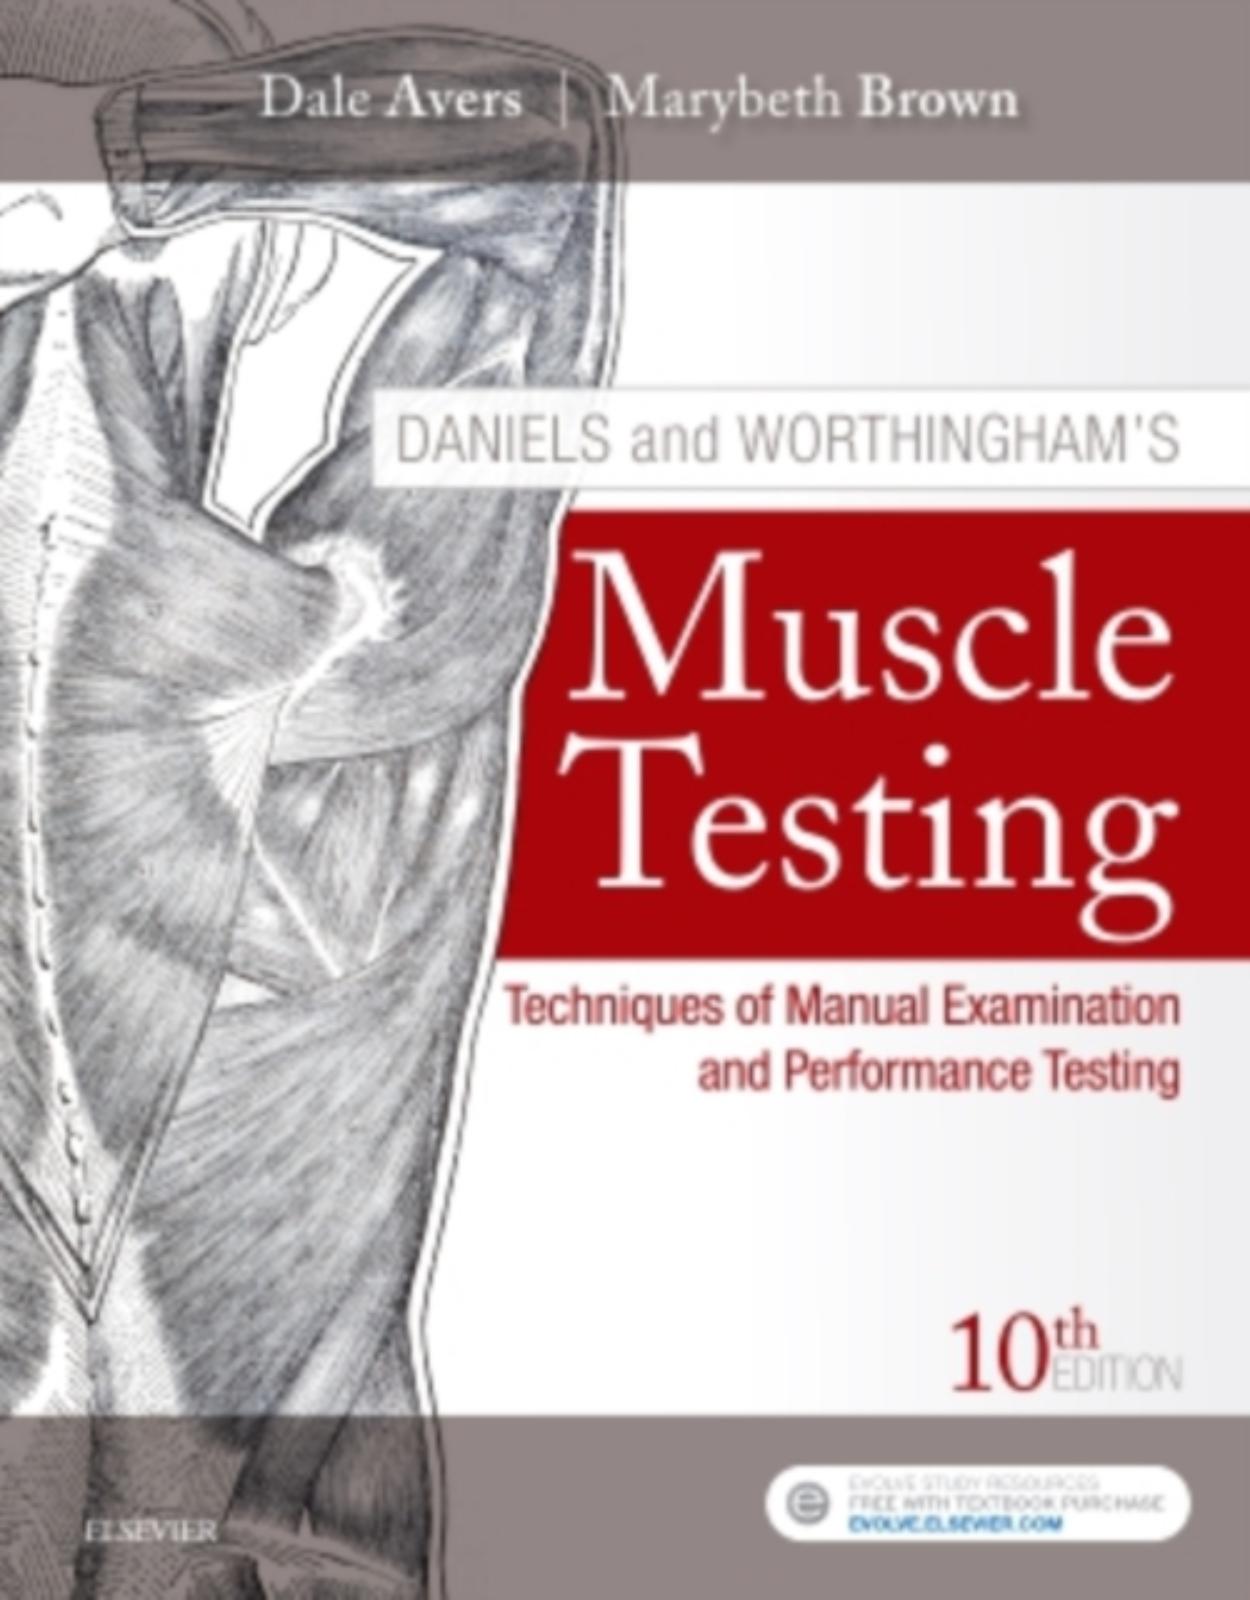 Daniels and Worthingham’s Muscle Testing: Techniques of Manual Examination and Performance Testing, 10e